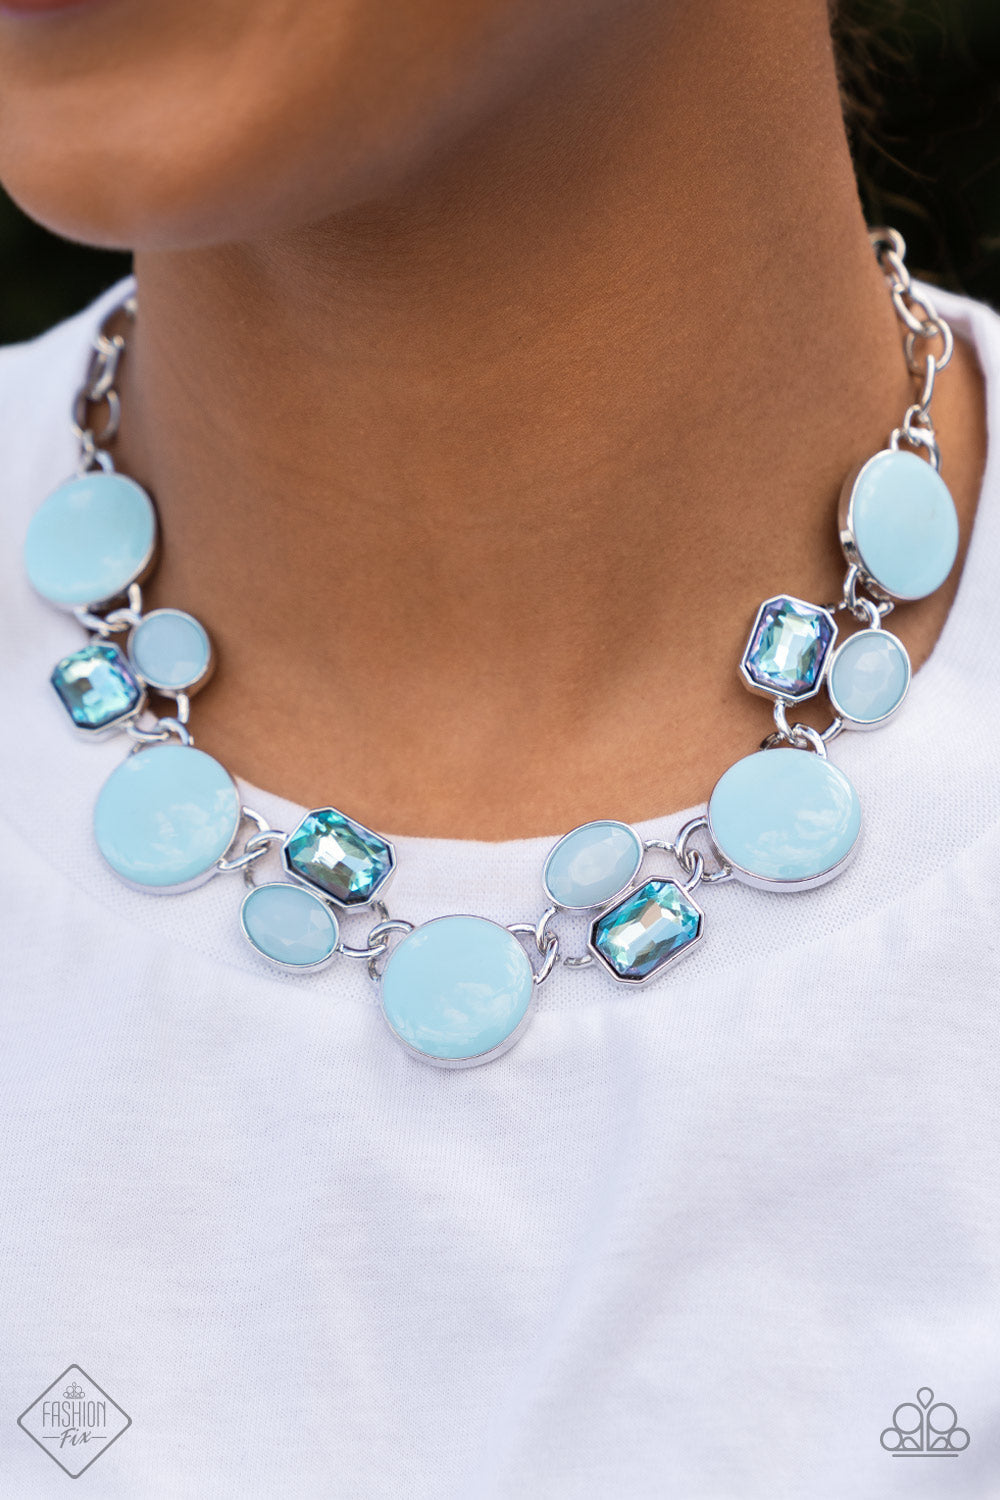 Dreaming in MULTICOLOR - Blue Gem - Silver Necklace - Paparazzi Accessories - Sweet pastel of Spun Sugar, sparkling blue gems combine with milky blue beads and alternate across the collar with oversized discs painted in blue enamel. The whimsically modern collection connects to a silver chain resulting in a charismatic display below the collar.